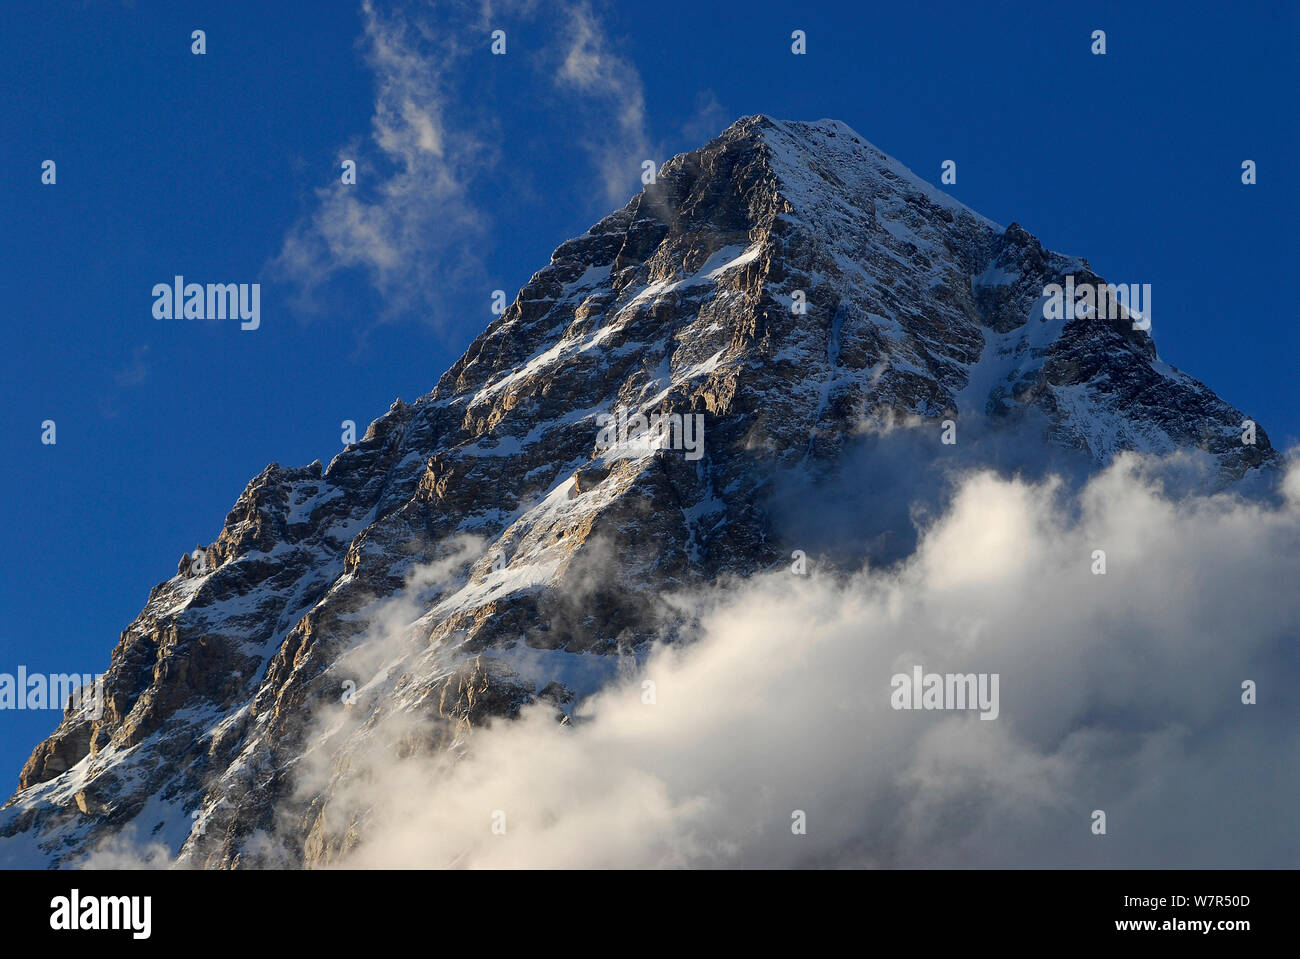 View looking up to the summit of K2 (8,611m), Central Karakoram National Park, Pakistan, June 2007 Stock Photo